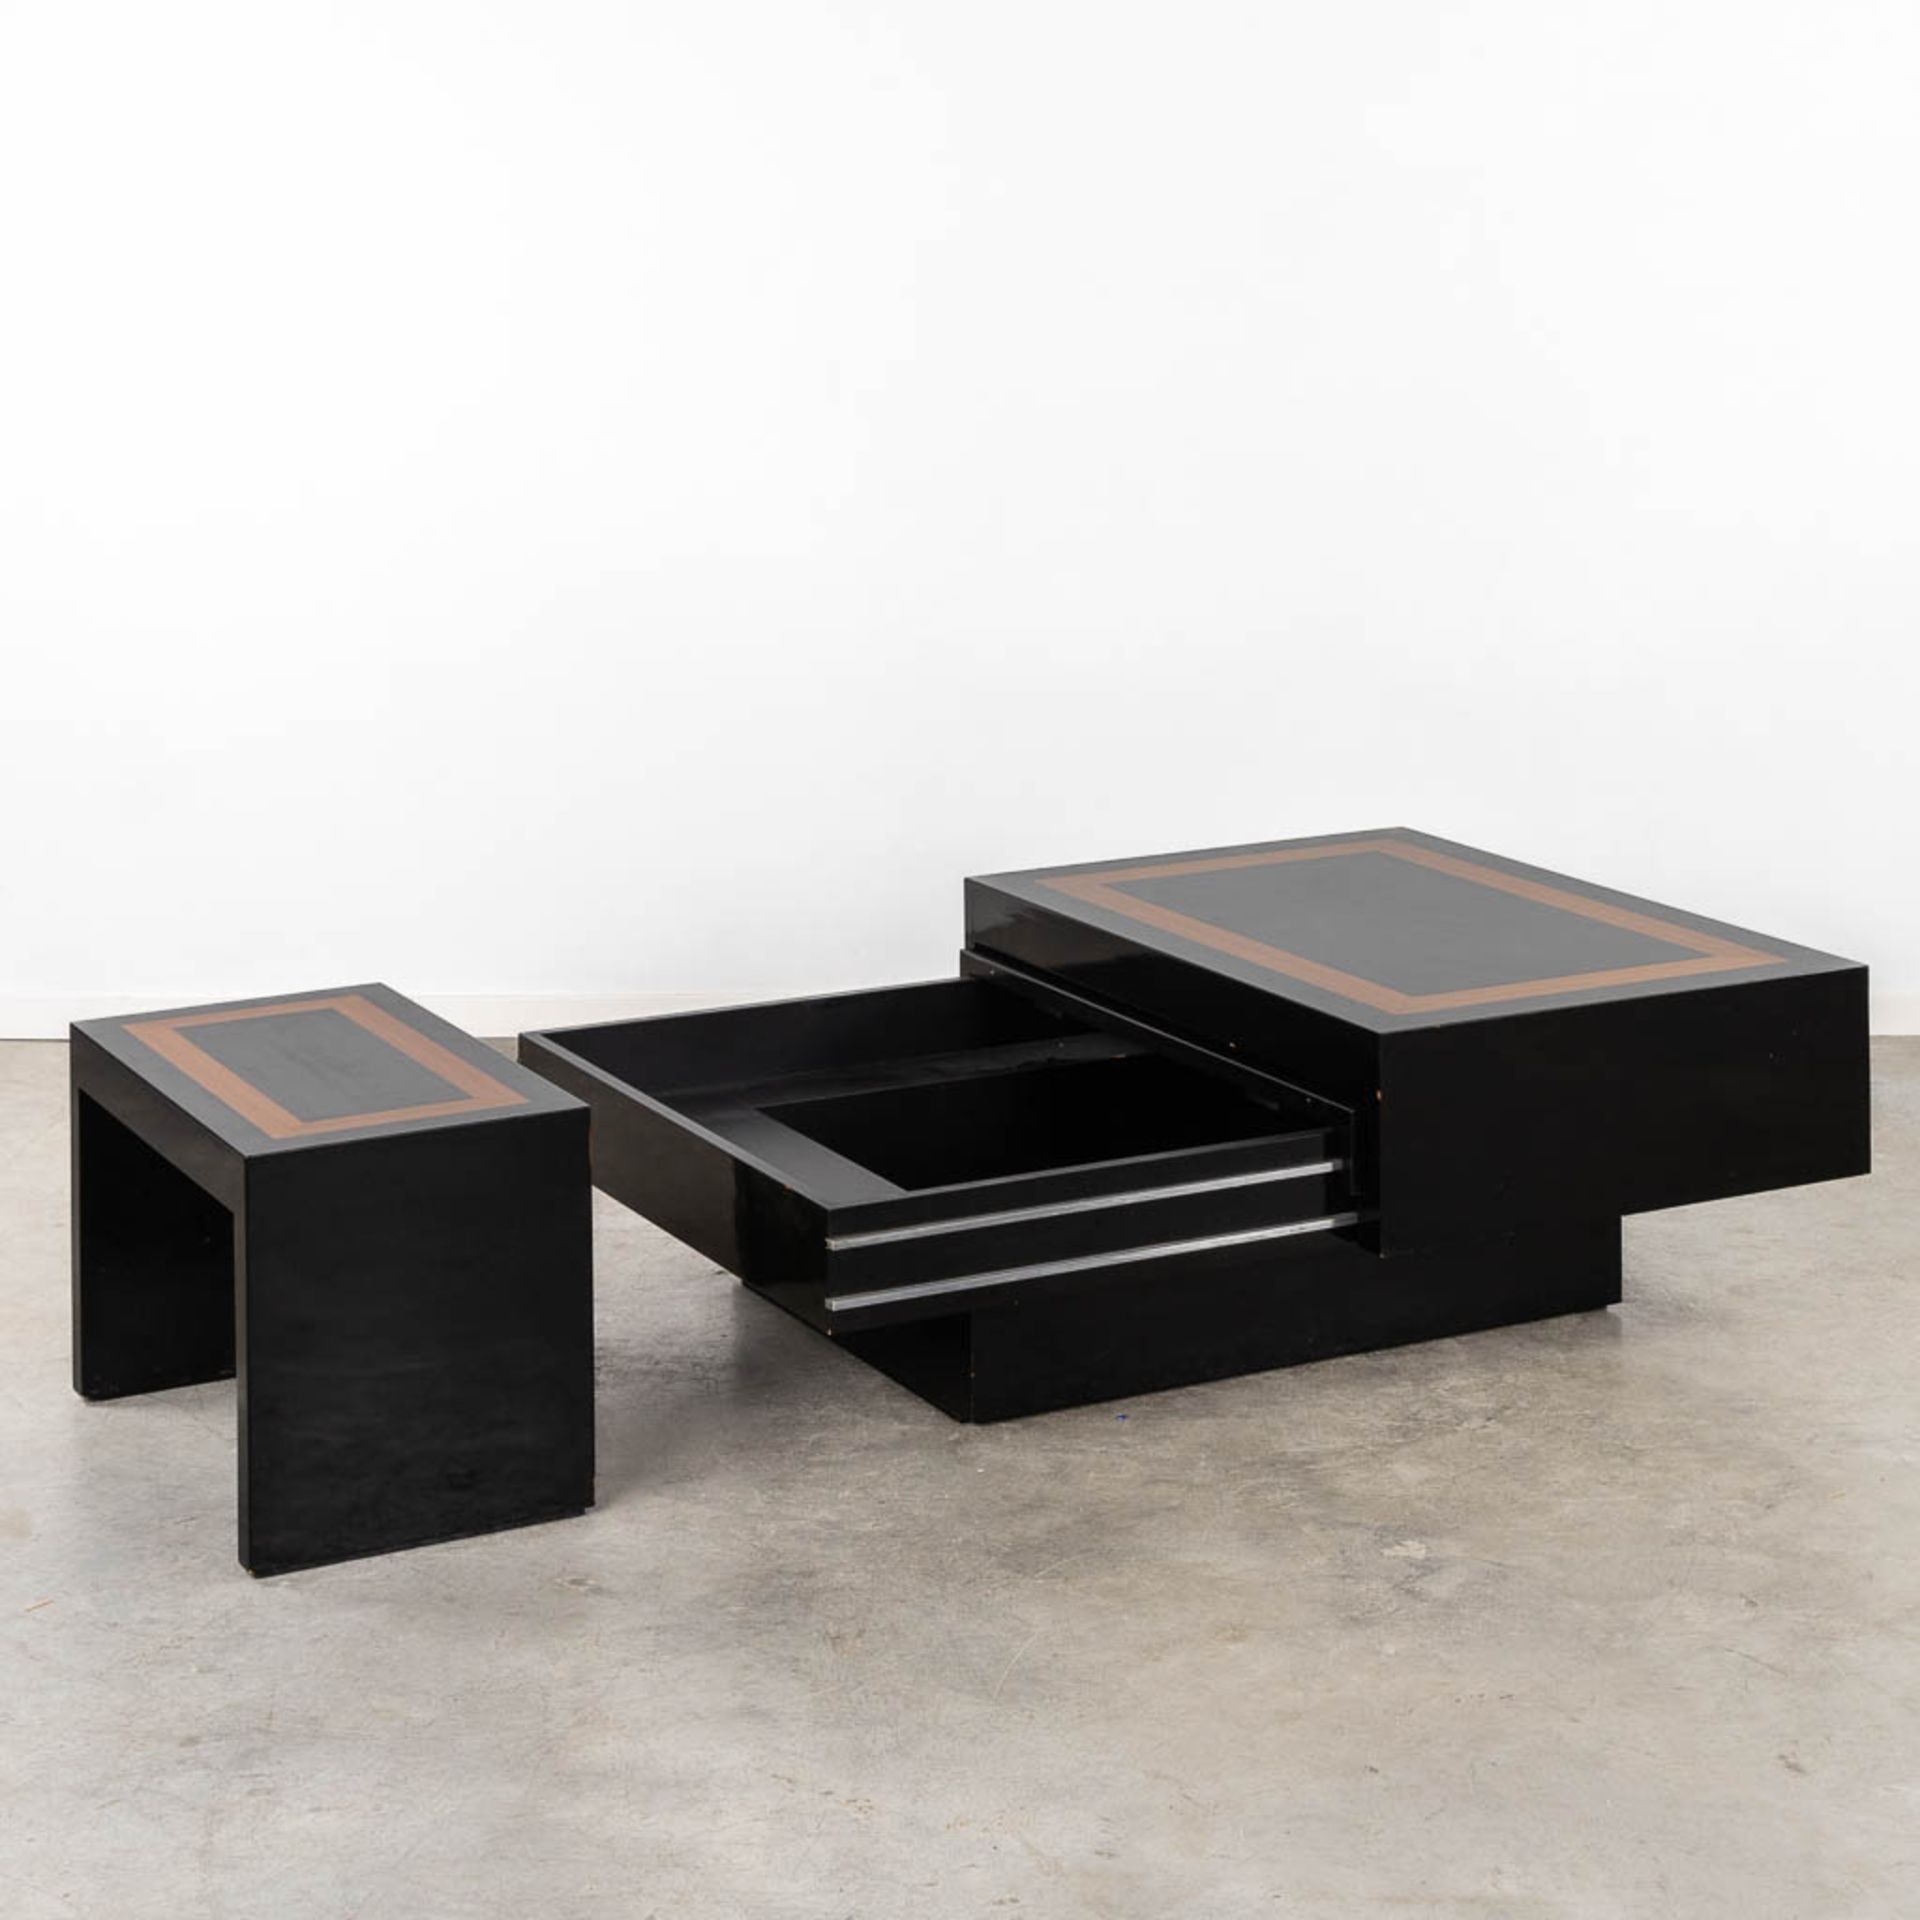 A slideable coffee table, added a bench. Lacquered wood. (L:110 x W:145 x H:47 cm) - Bild 4 aus 9